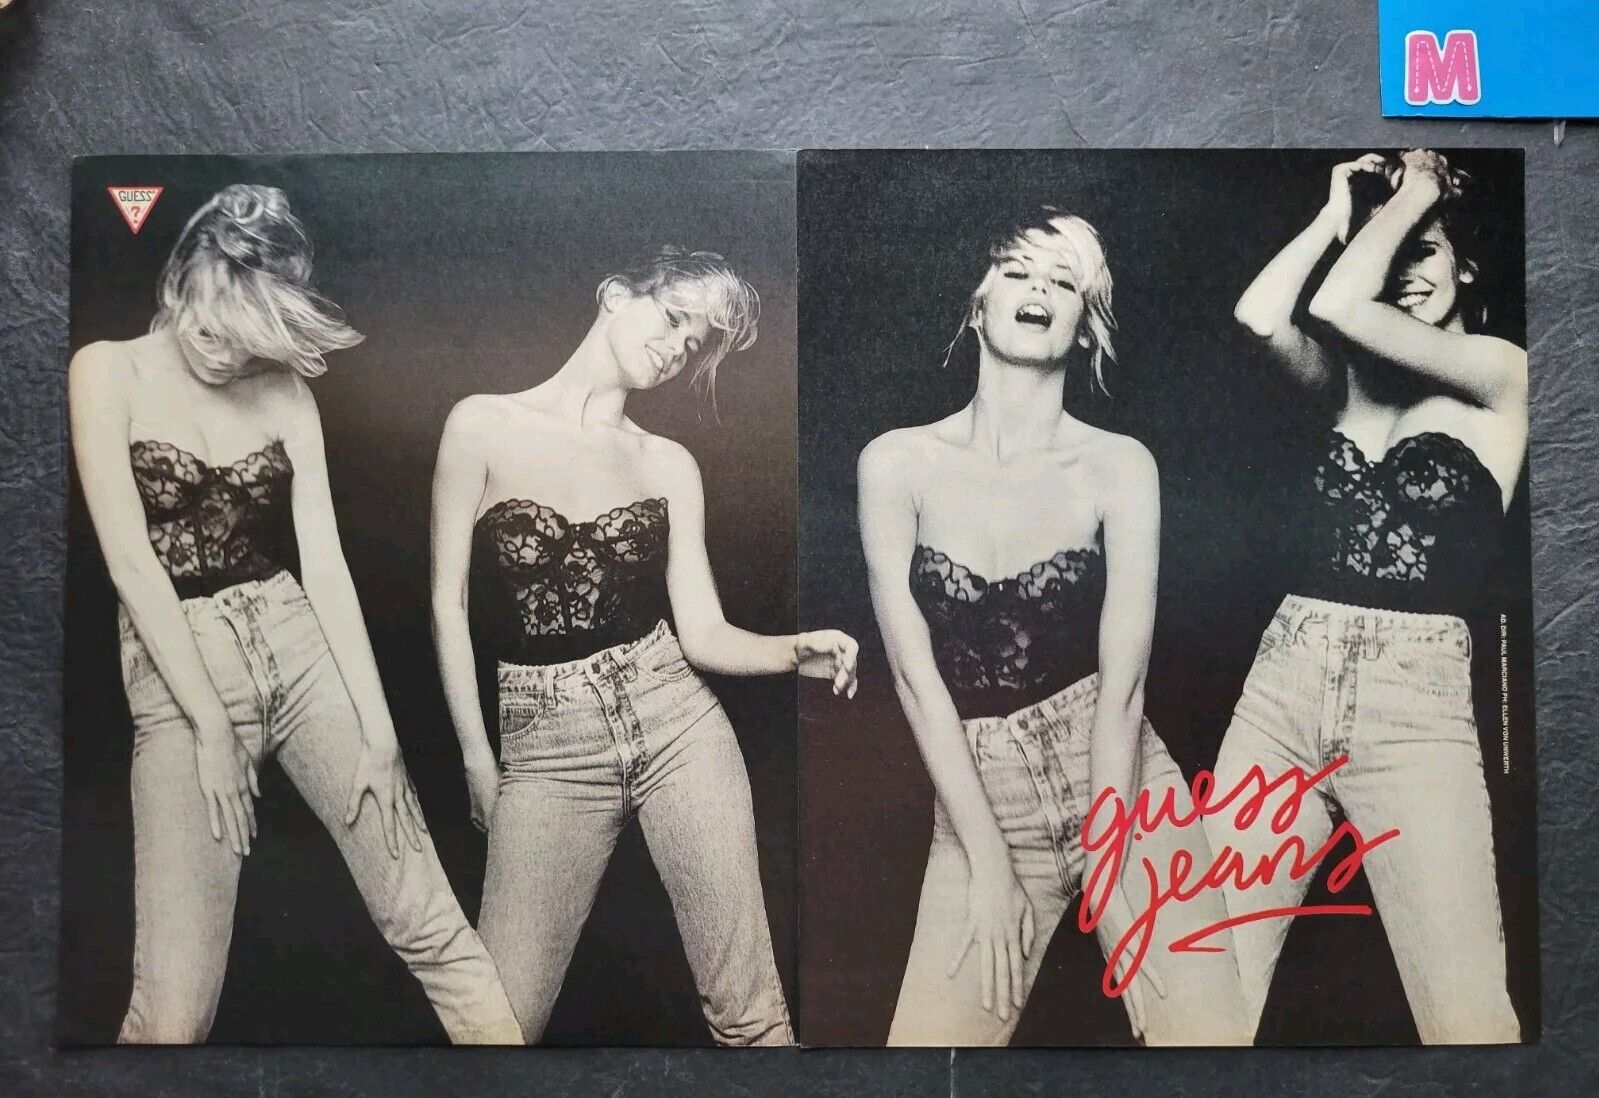 Claudia Schiffer Guess Jeans Promo 2 Page Print Advertisement Vintage 1990